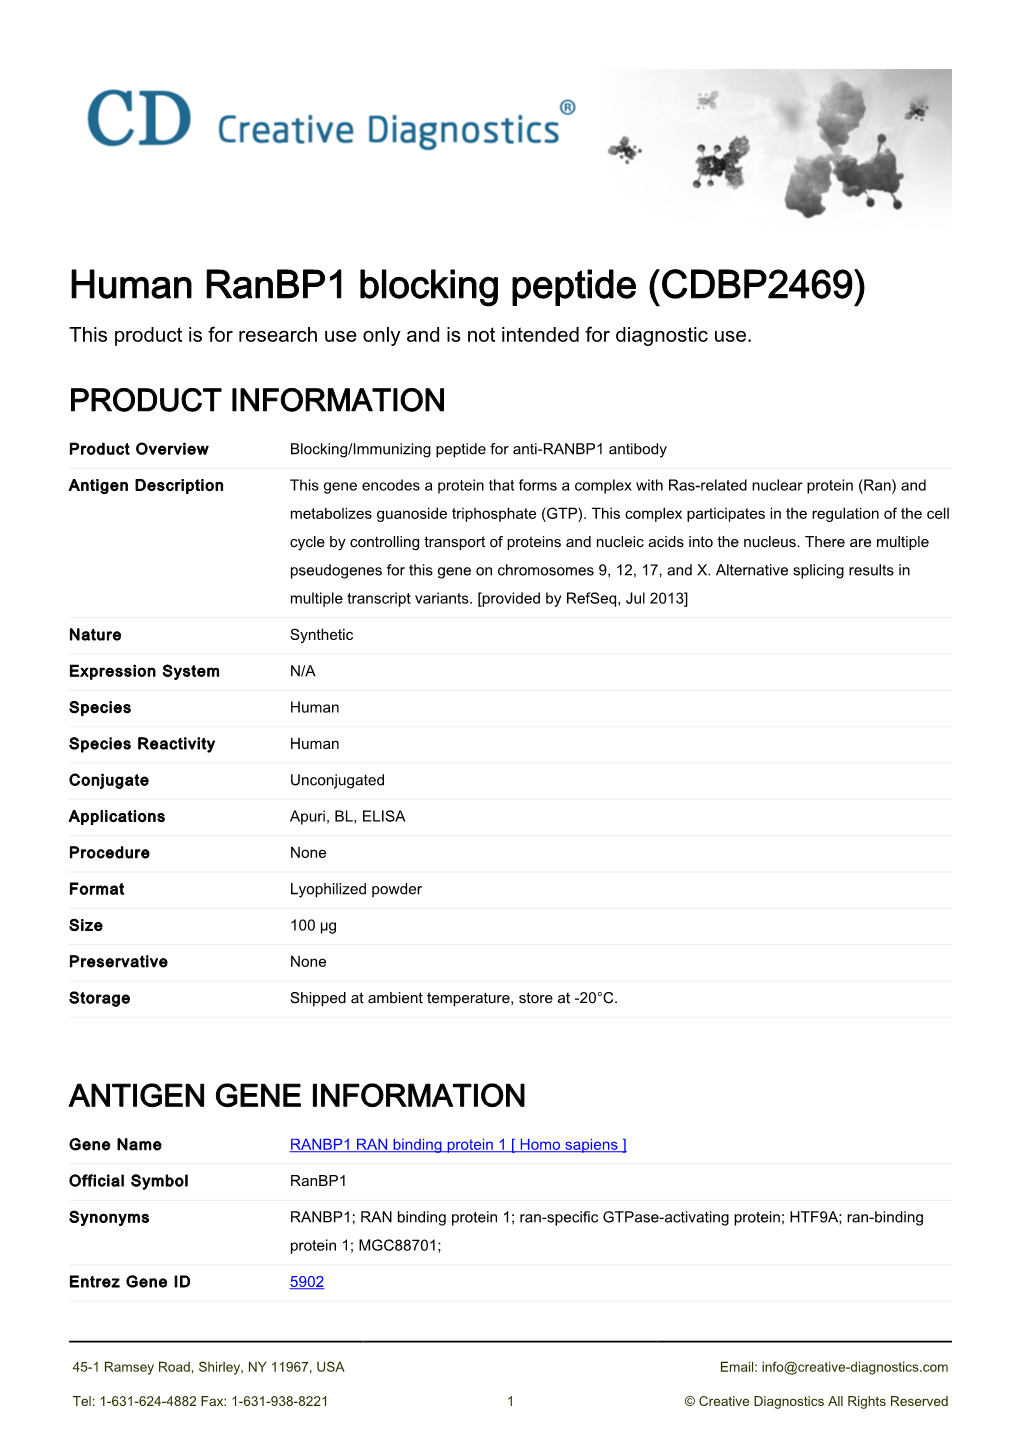 Human Ranbp1 Blocking Peptide (CDBP2469) This Product Is for Research Use Only and Is Not Intended for Diagnostic Use